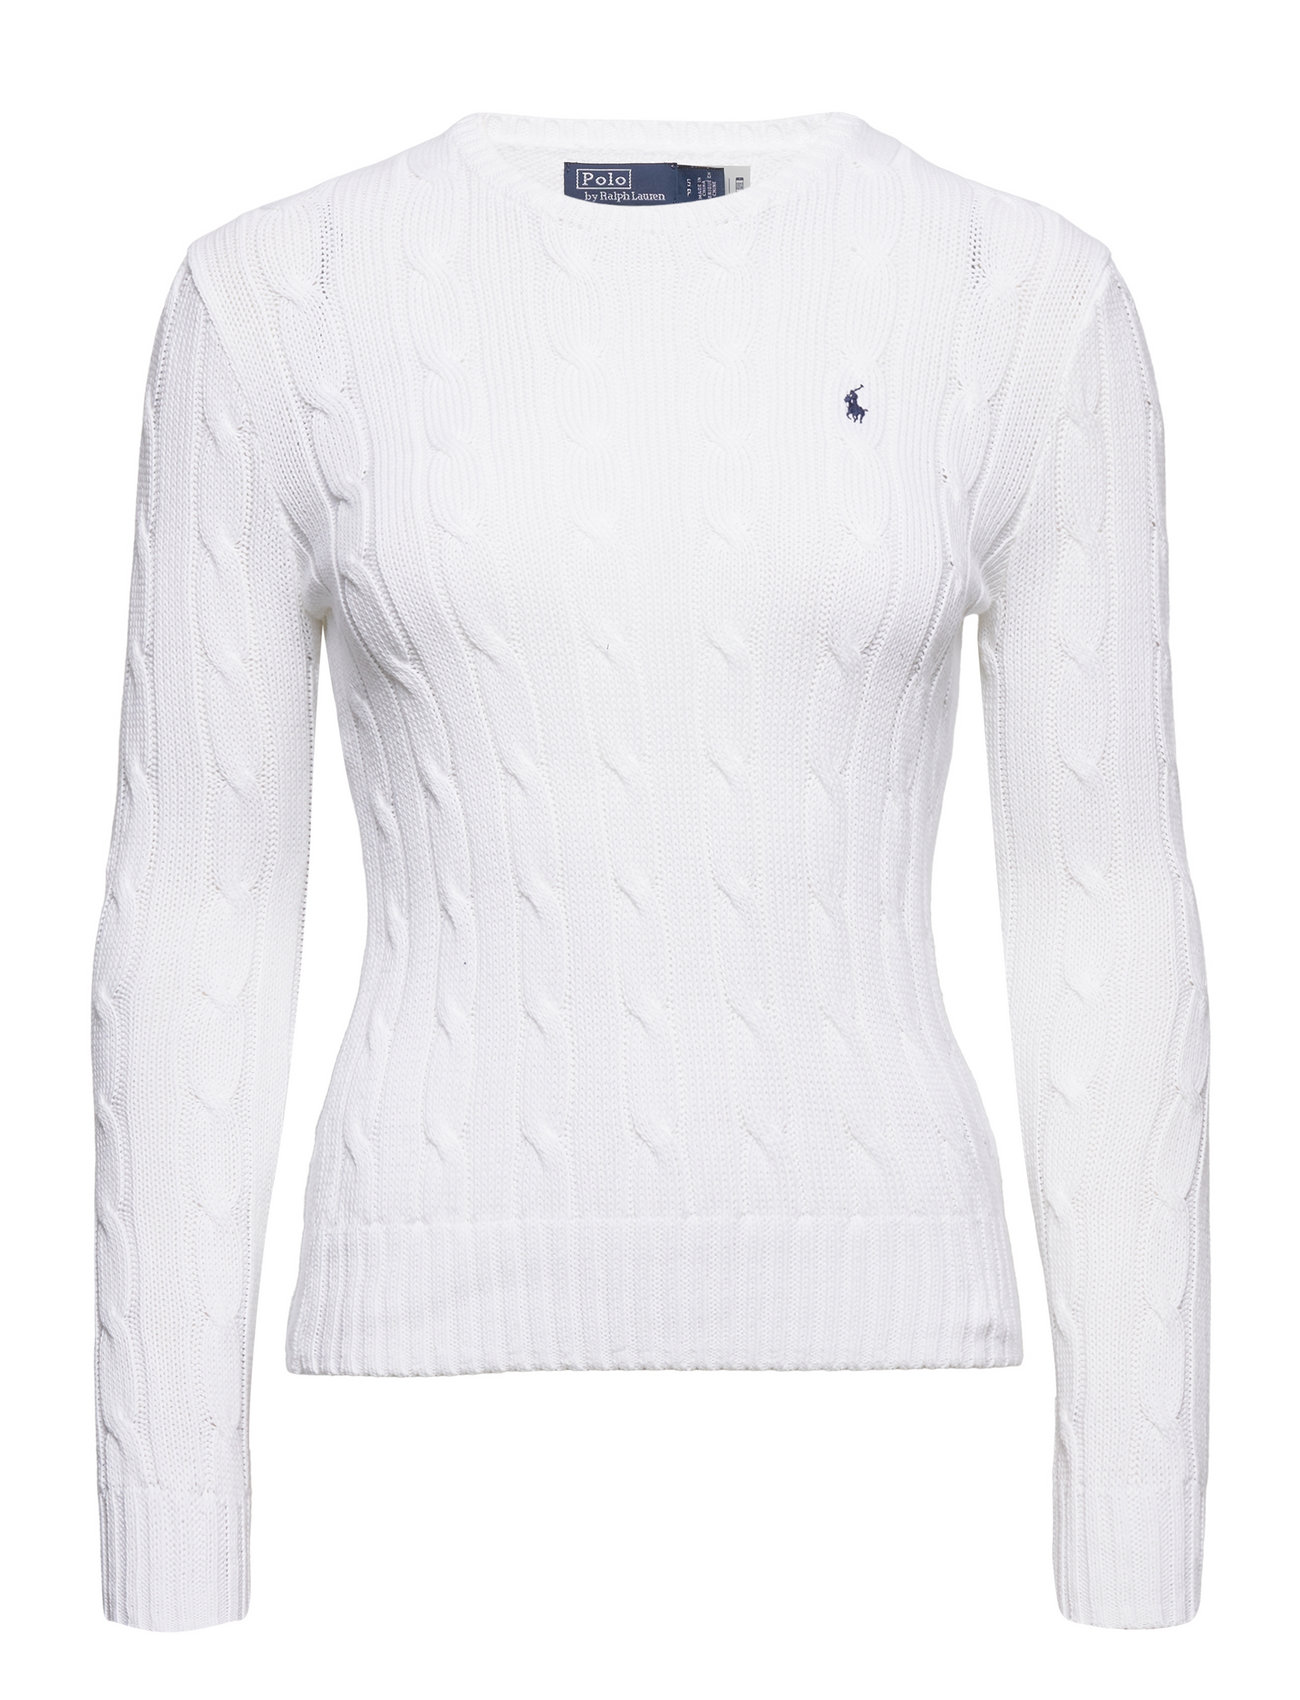 Cable-Knit Cotton Crewneck Sweater Tops Knitwear Jumpers White Polo Ralph Lauren